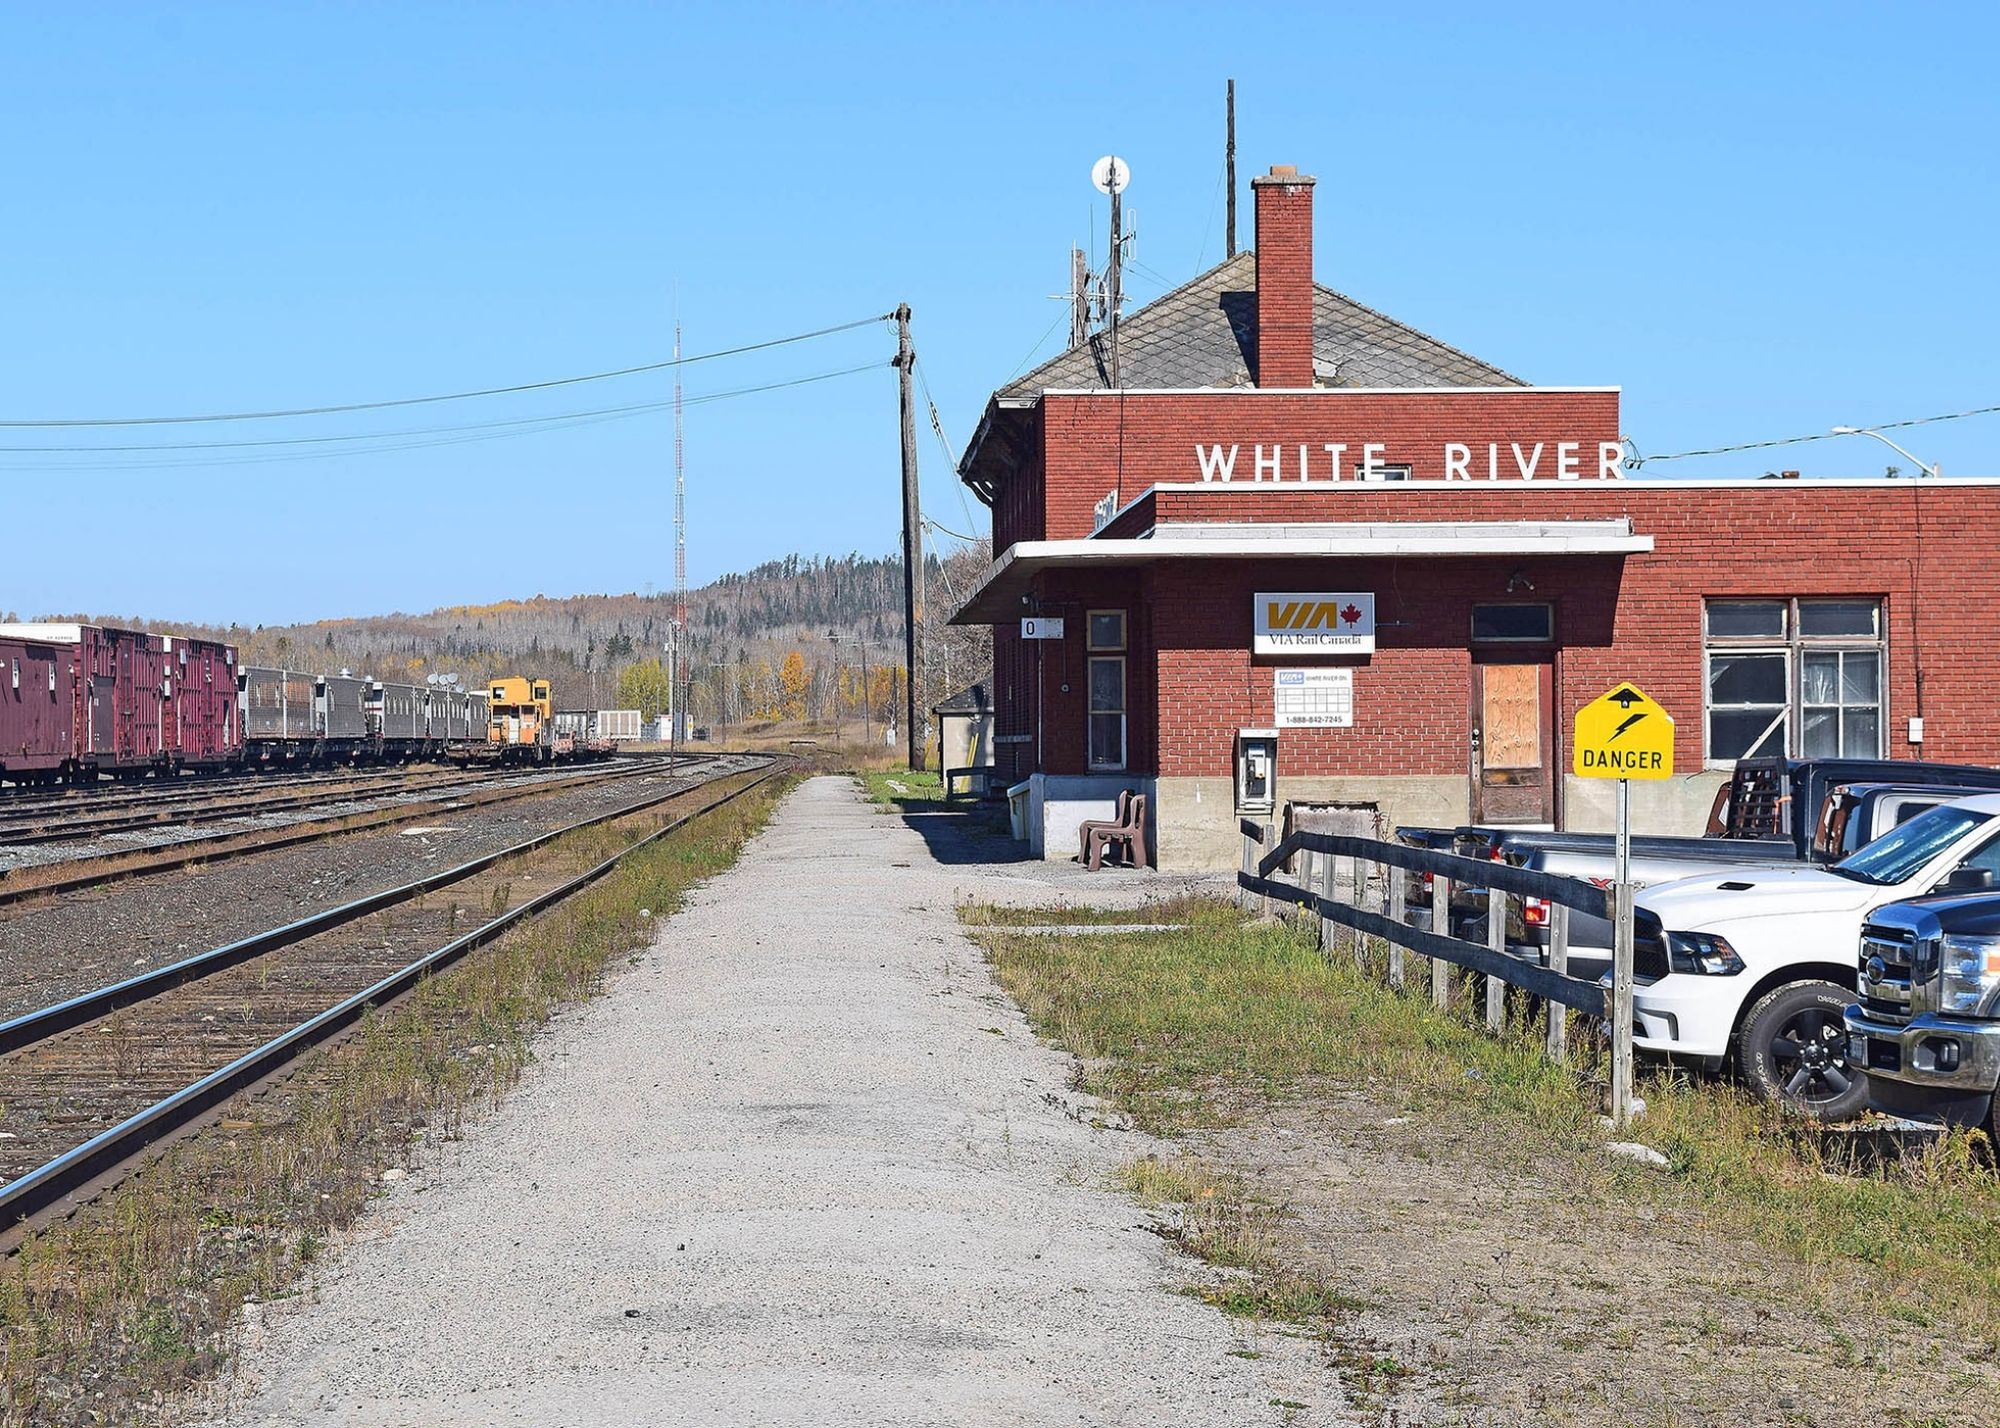 White River railway station and gravel platform on a sunny day.